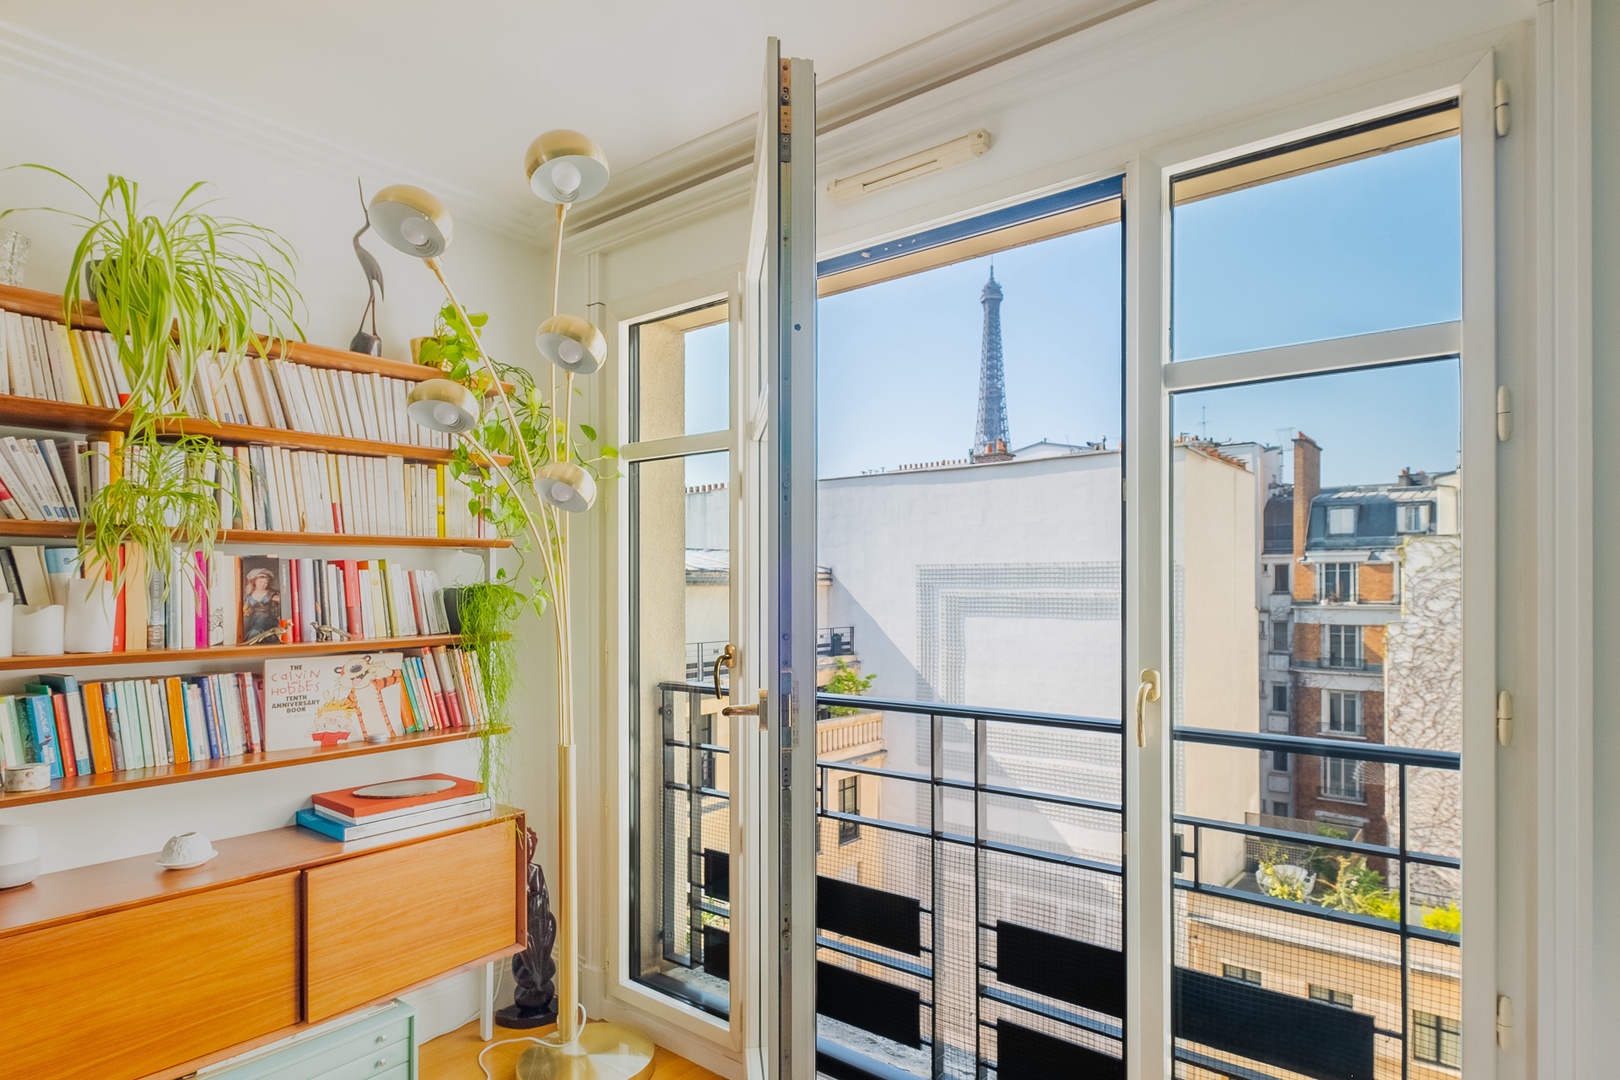 Enjoy the view of the Eiffel Tower peaking over rooftops.